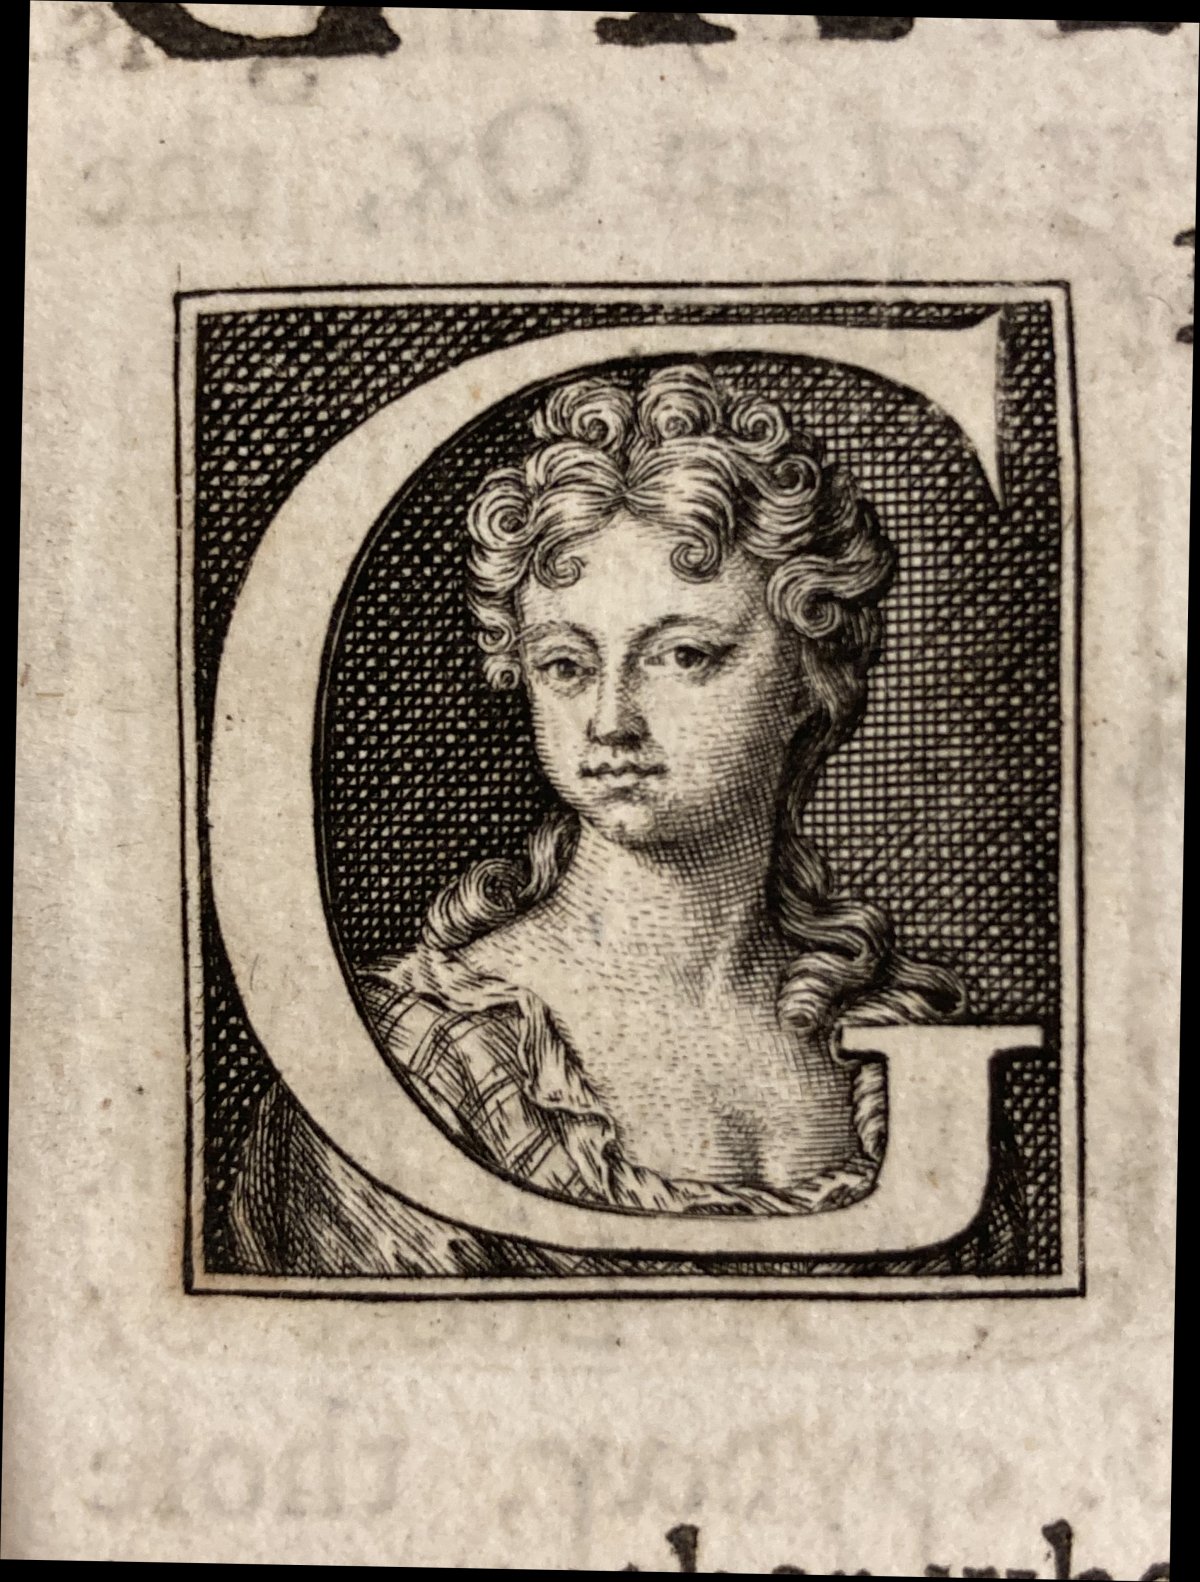 An engraved portrait of an 18th-century woman, within a letter 'G': Elizabeth Elstob..